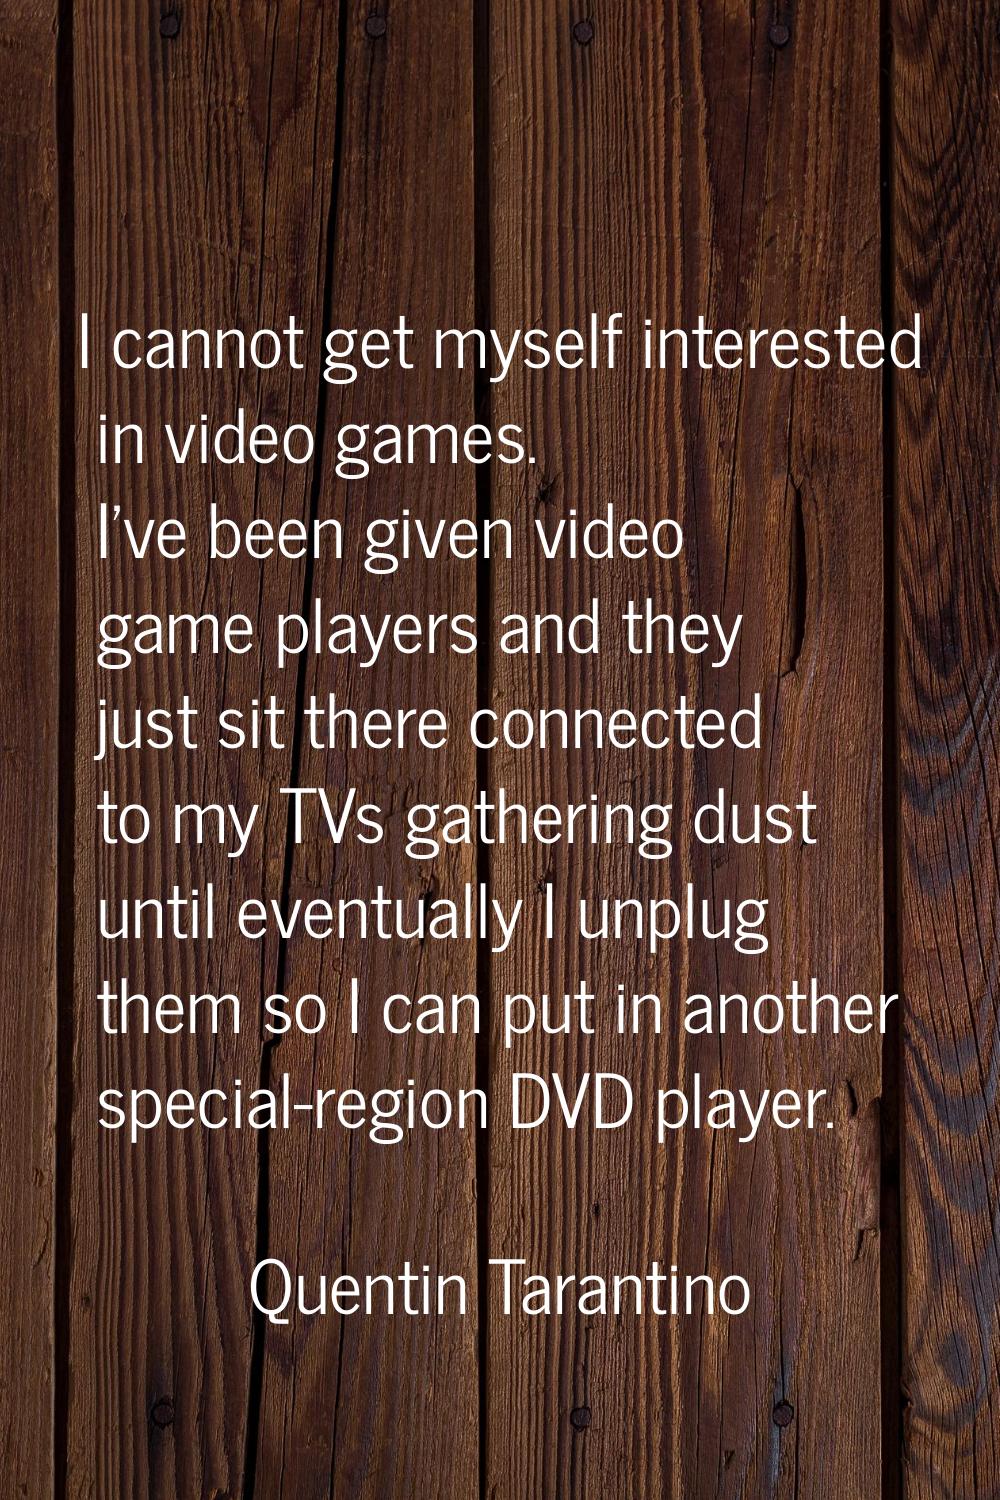 I cannot get myself interested in video games. I've been given video game players and they just sit